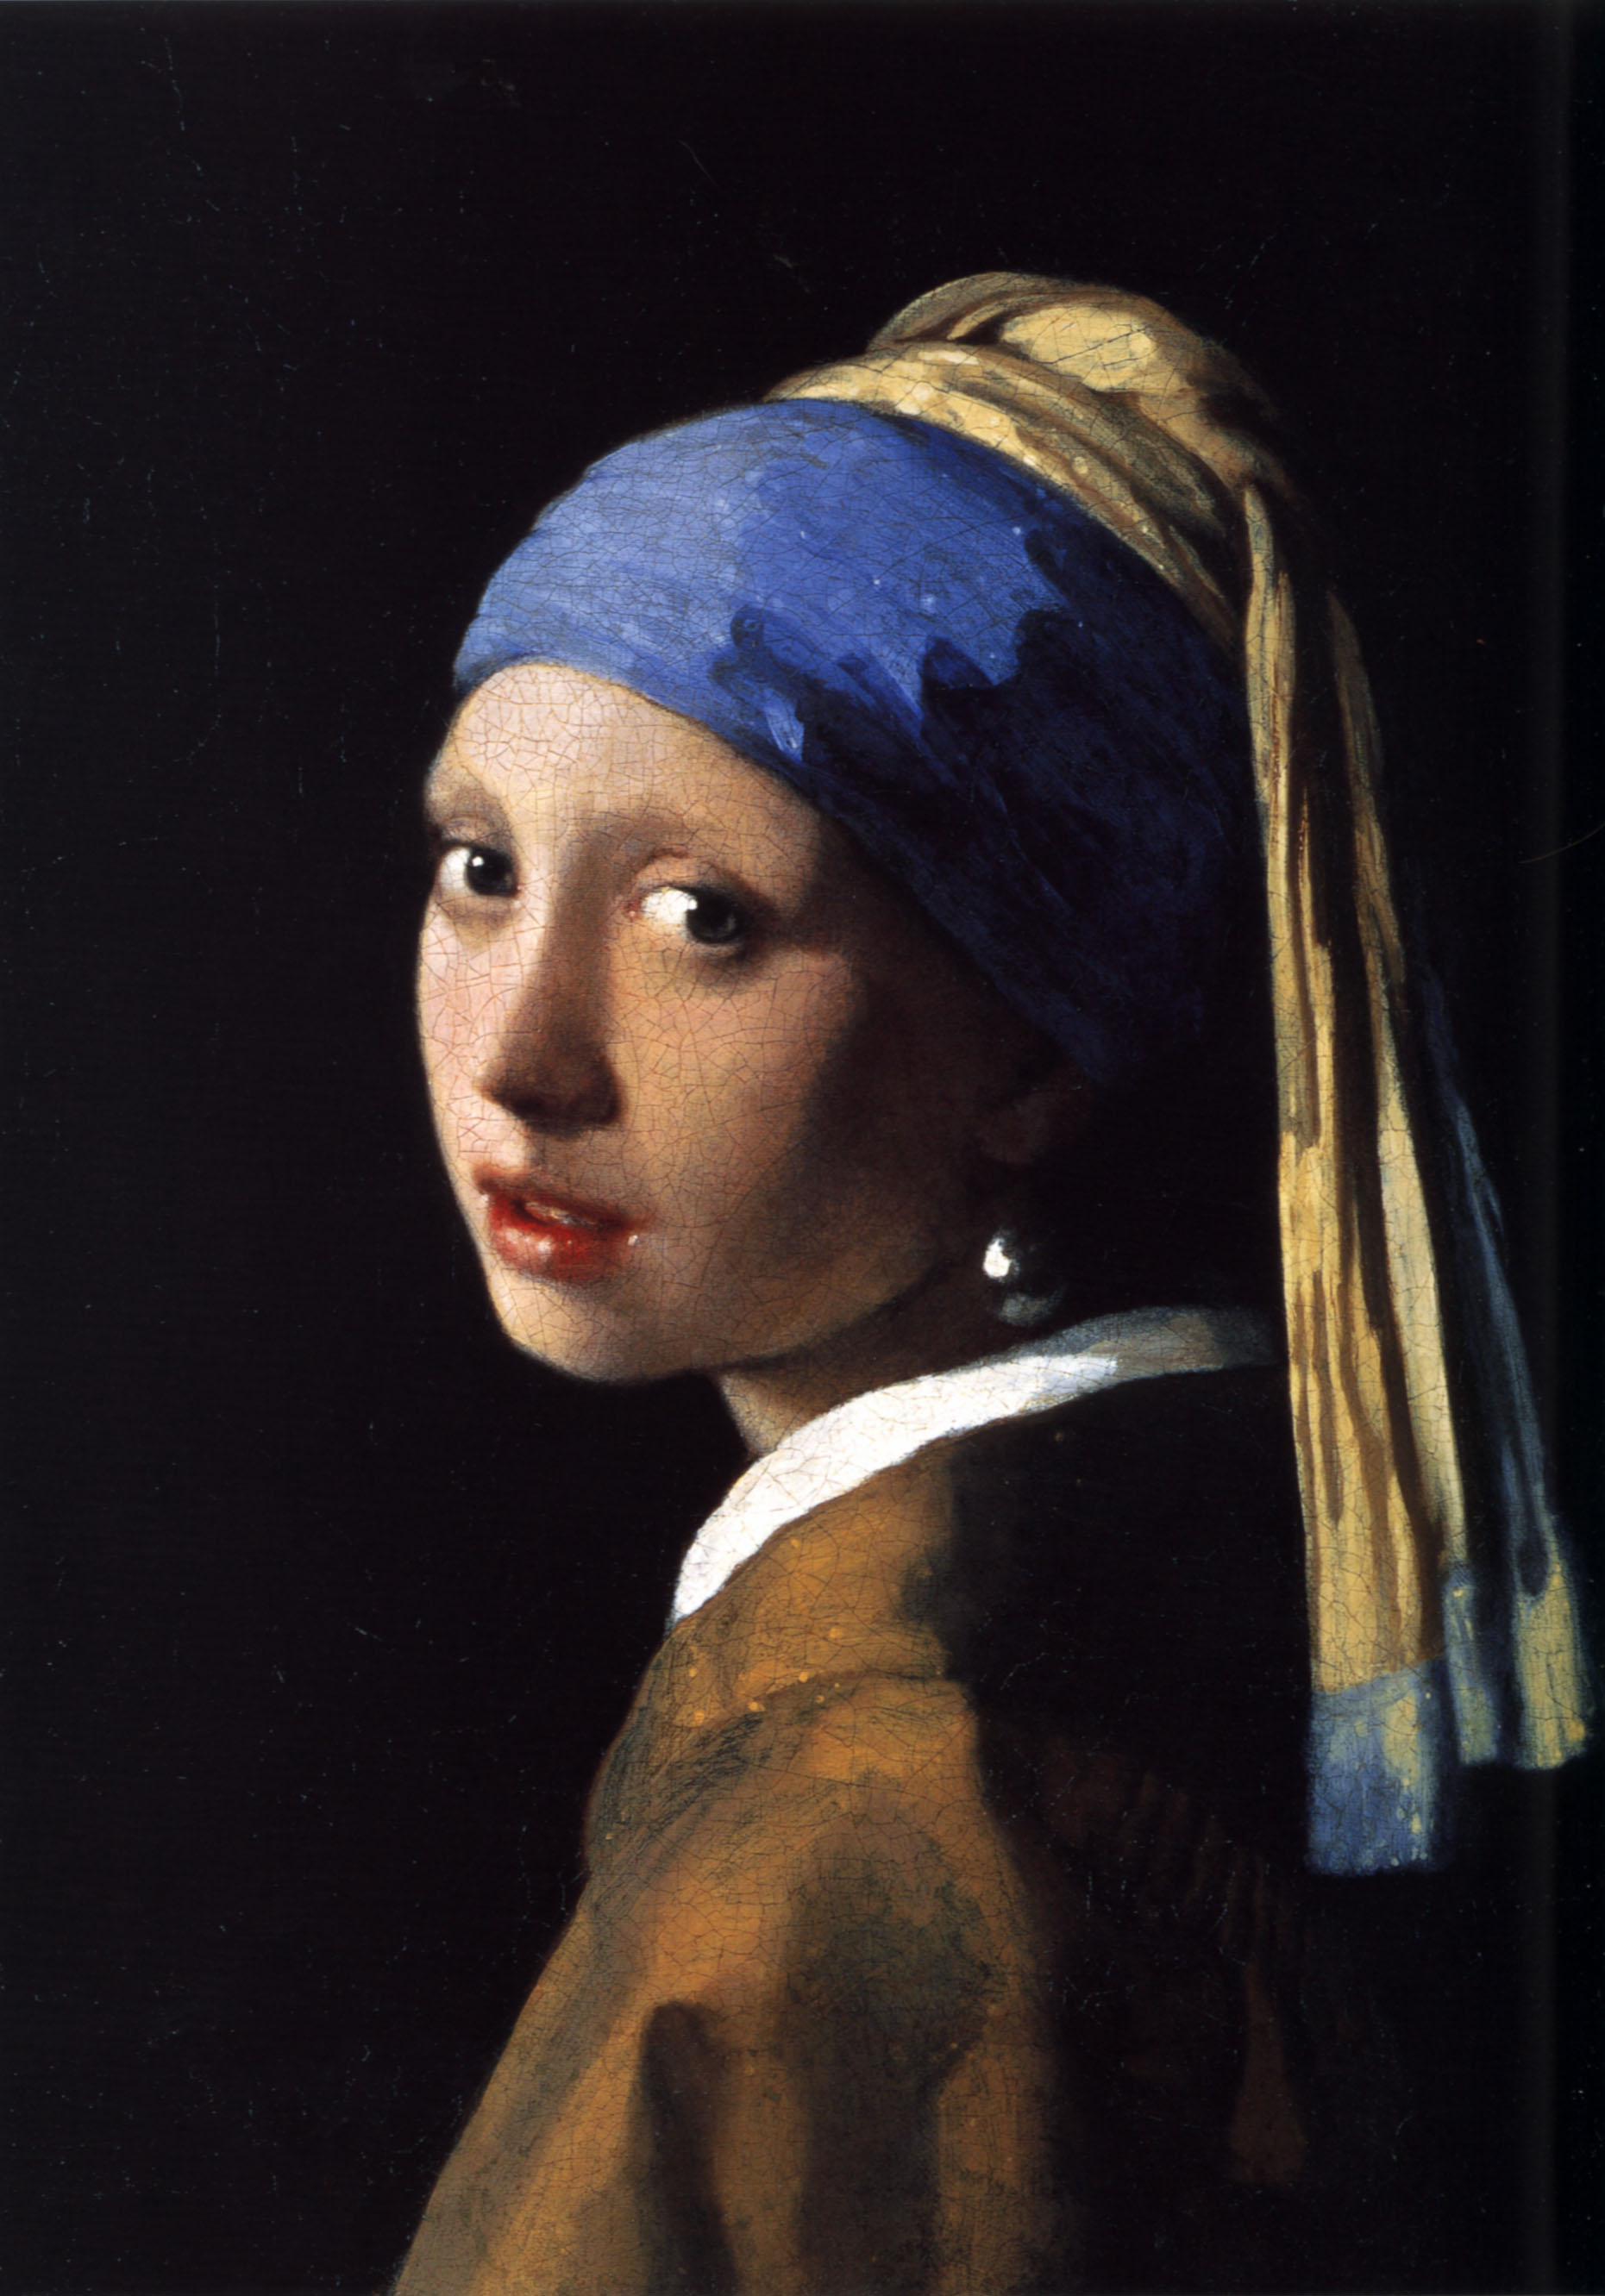 http://fr.academic.ru/pictures/frwiki/74/Johannes_Vermeer_(1632-1675)_-_The_Girl_With_The_Pearl_Earring_(1665).jpg